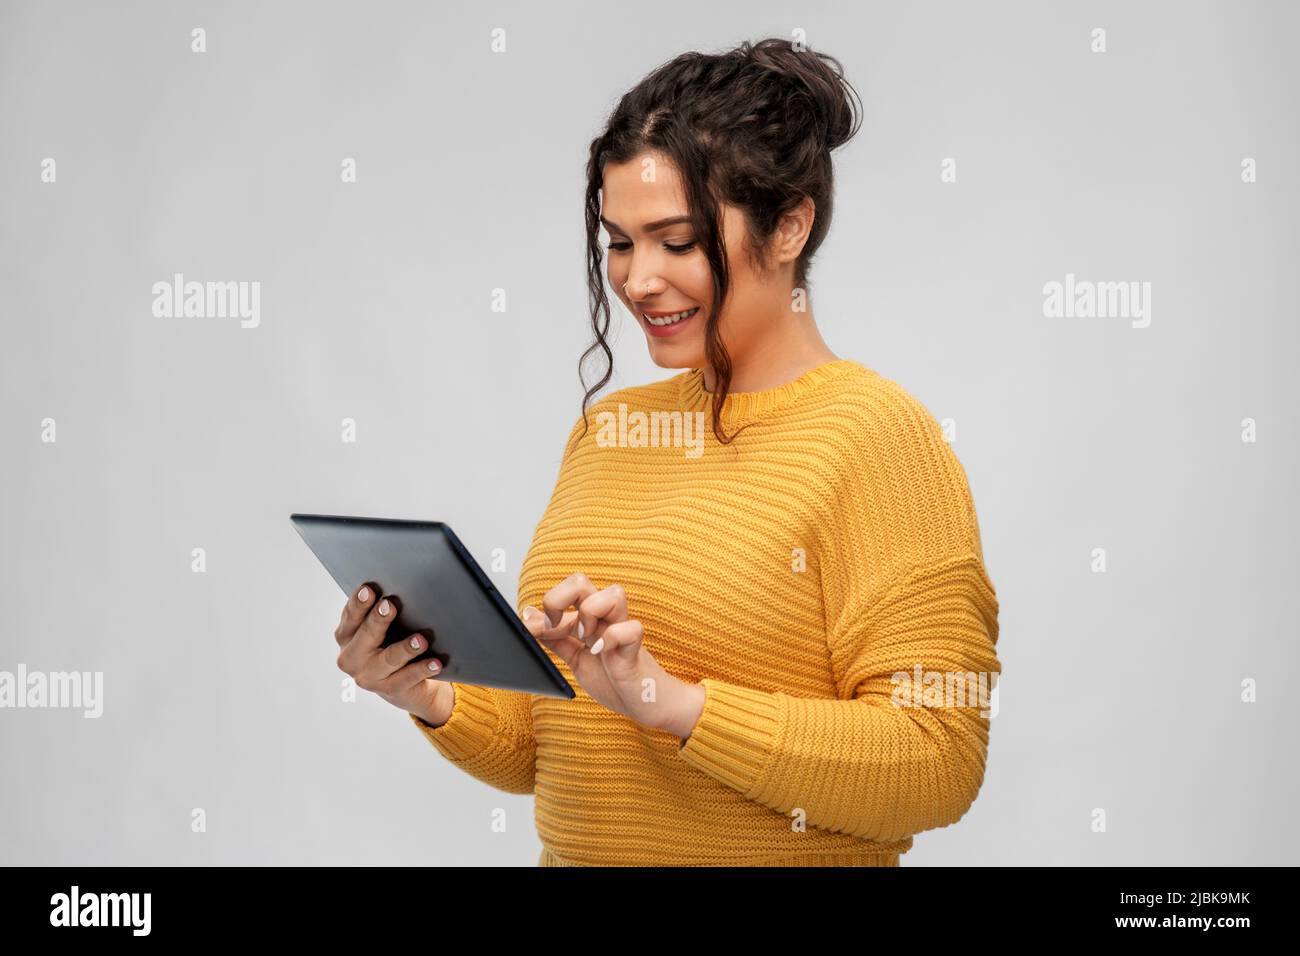 happy young woman using tablet pc computer Stock Photo